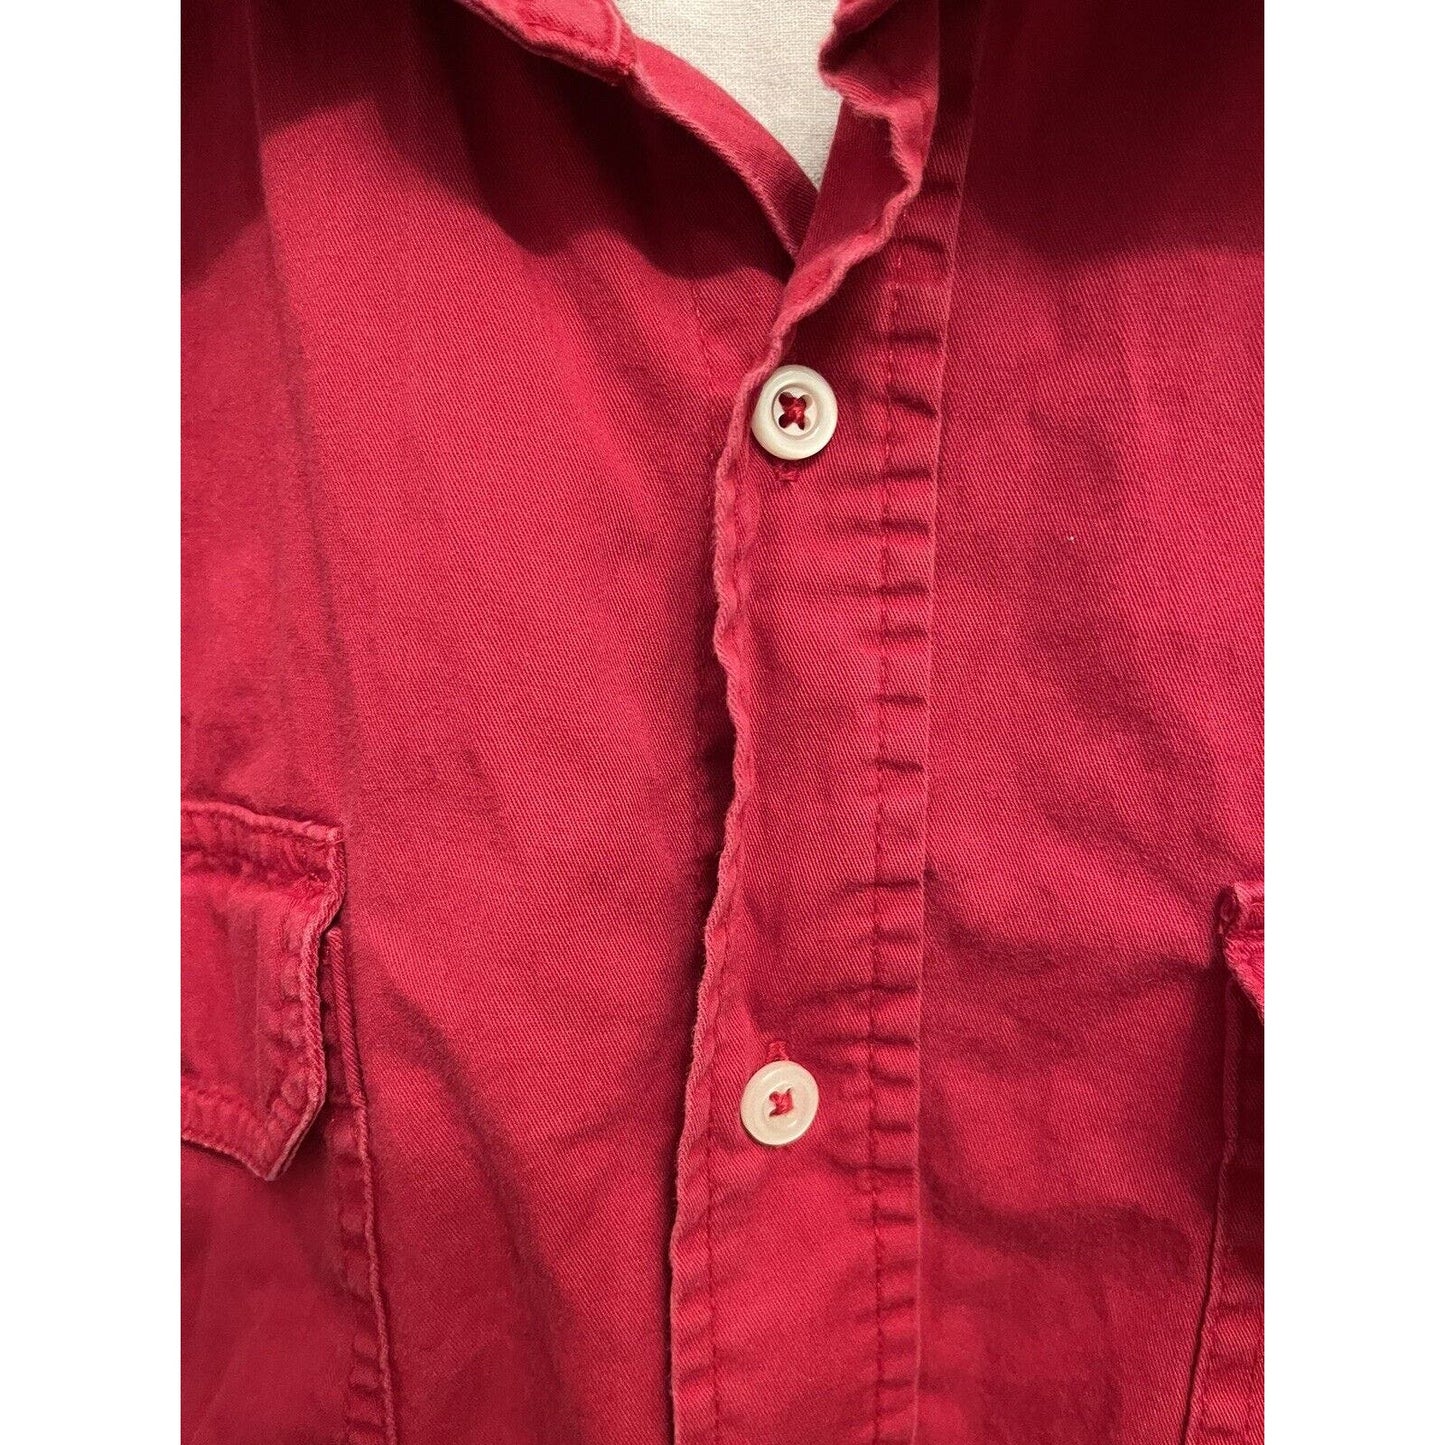 Wrangler Hero Button Up Shirt Mens Large Red Short Sleeve Pockets Outdoor Fish